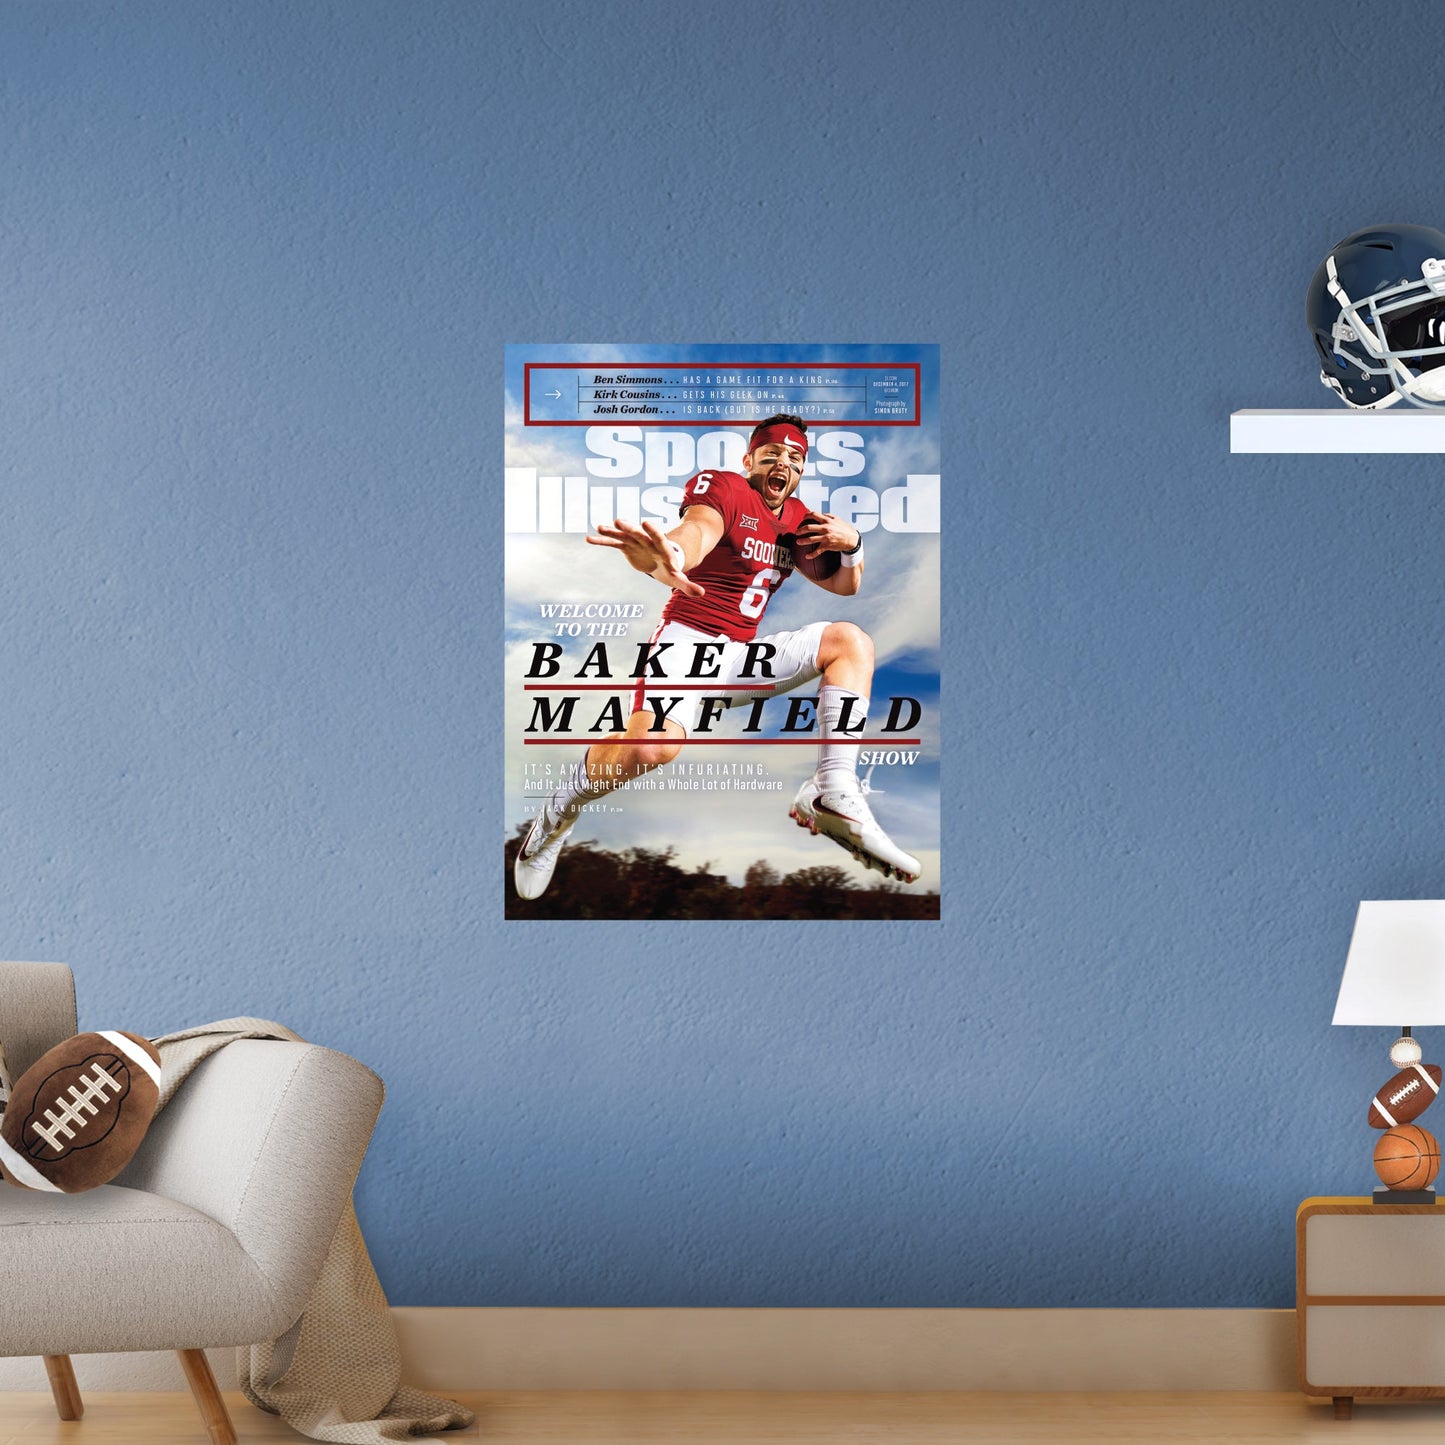 Oklahoma Sooners: Baker Mayfield December 2017 Sports Illustrated Cover - Officially Licensed NCAA Removable Adhesive Decal